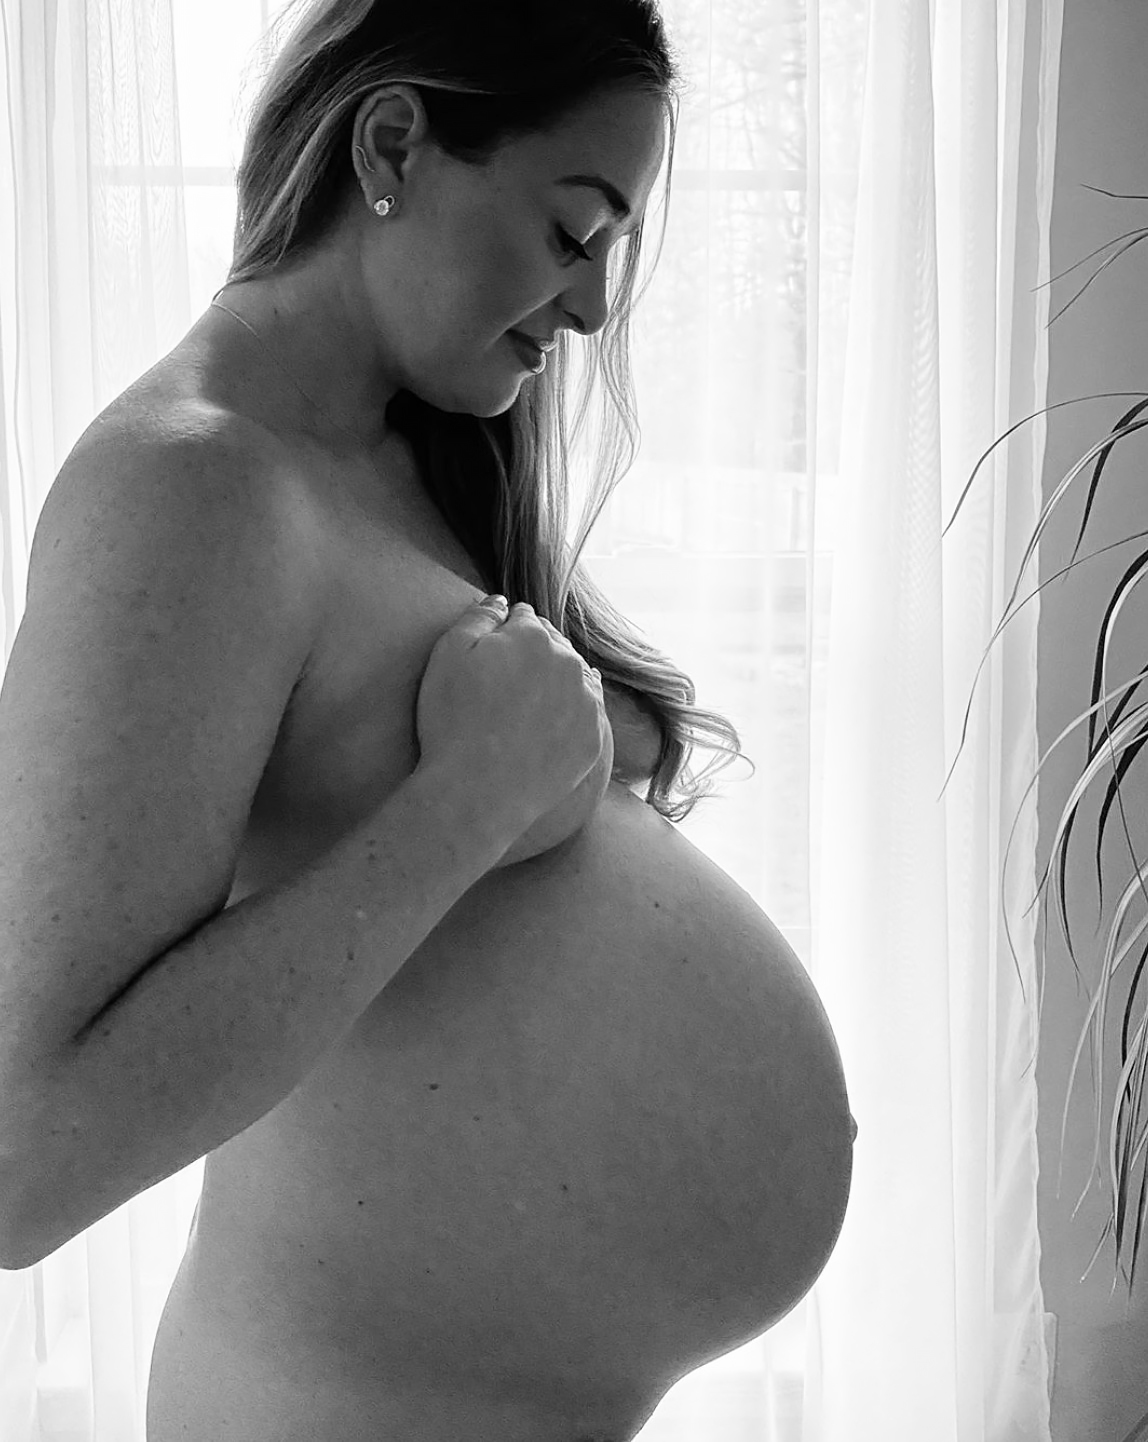 Pregnant Celebrity Videos - Celebrities Posing Nude While Pregnant: Maternity Pics